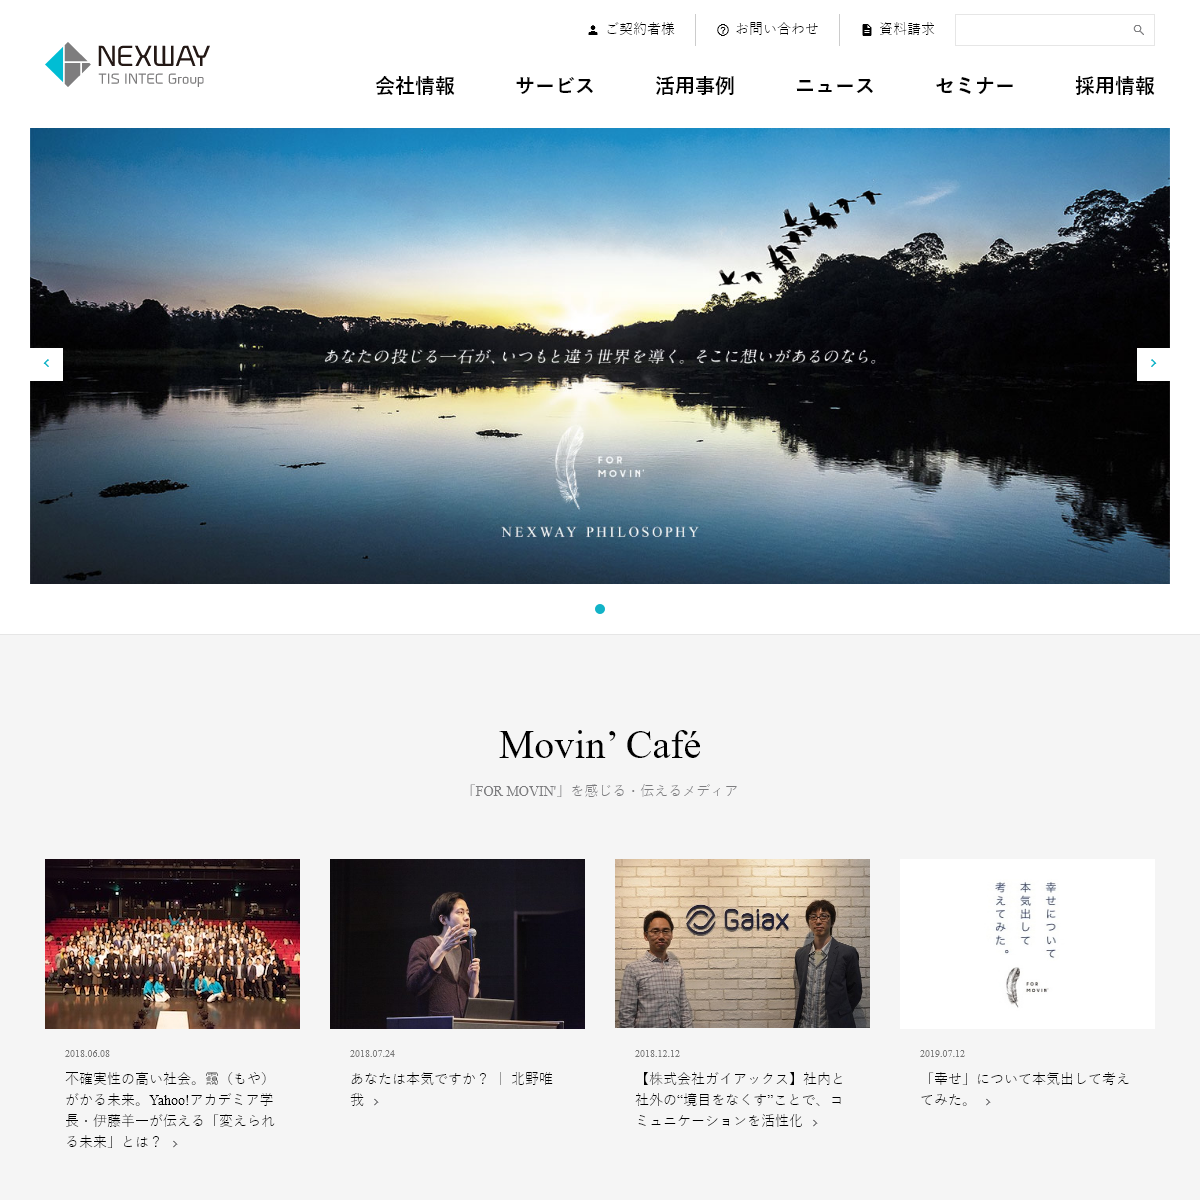 A complete backup of nexway.co.jp